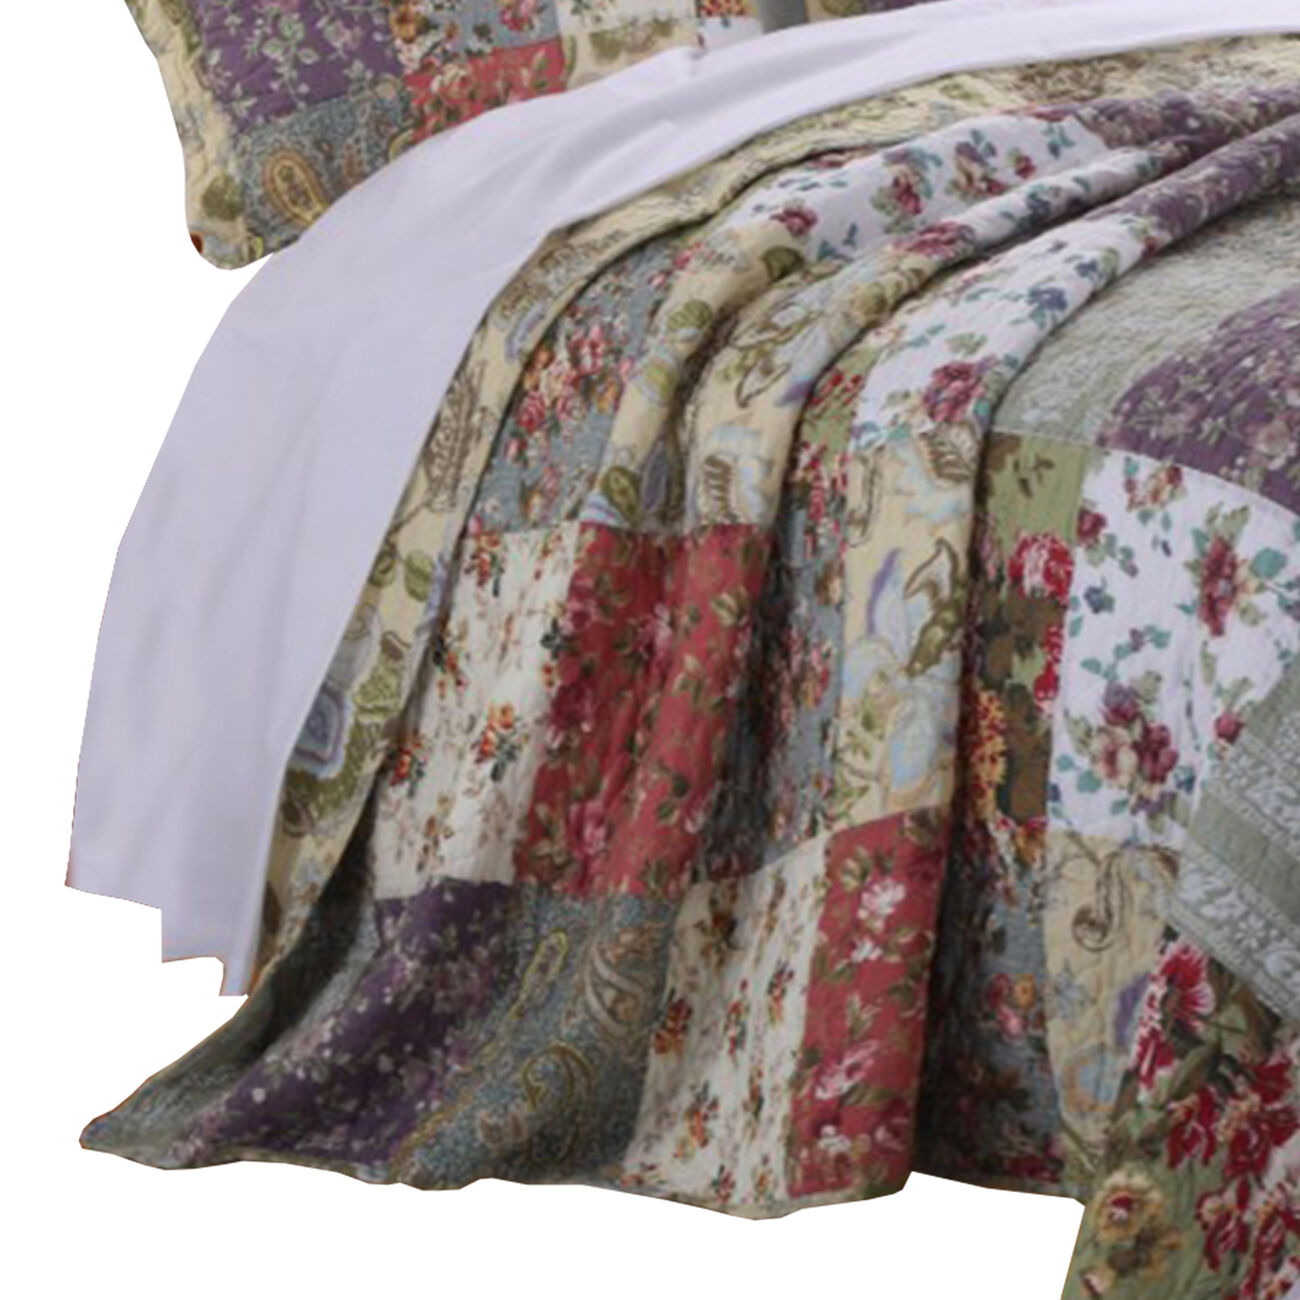 Chicago 3 Piece Fabric King Bedspread Set with Jacobean Prints, Multicolor